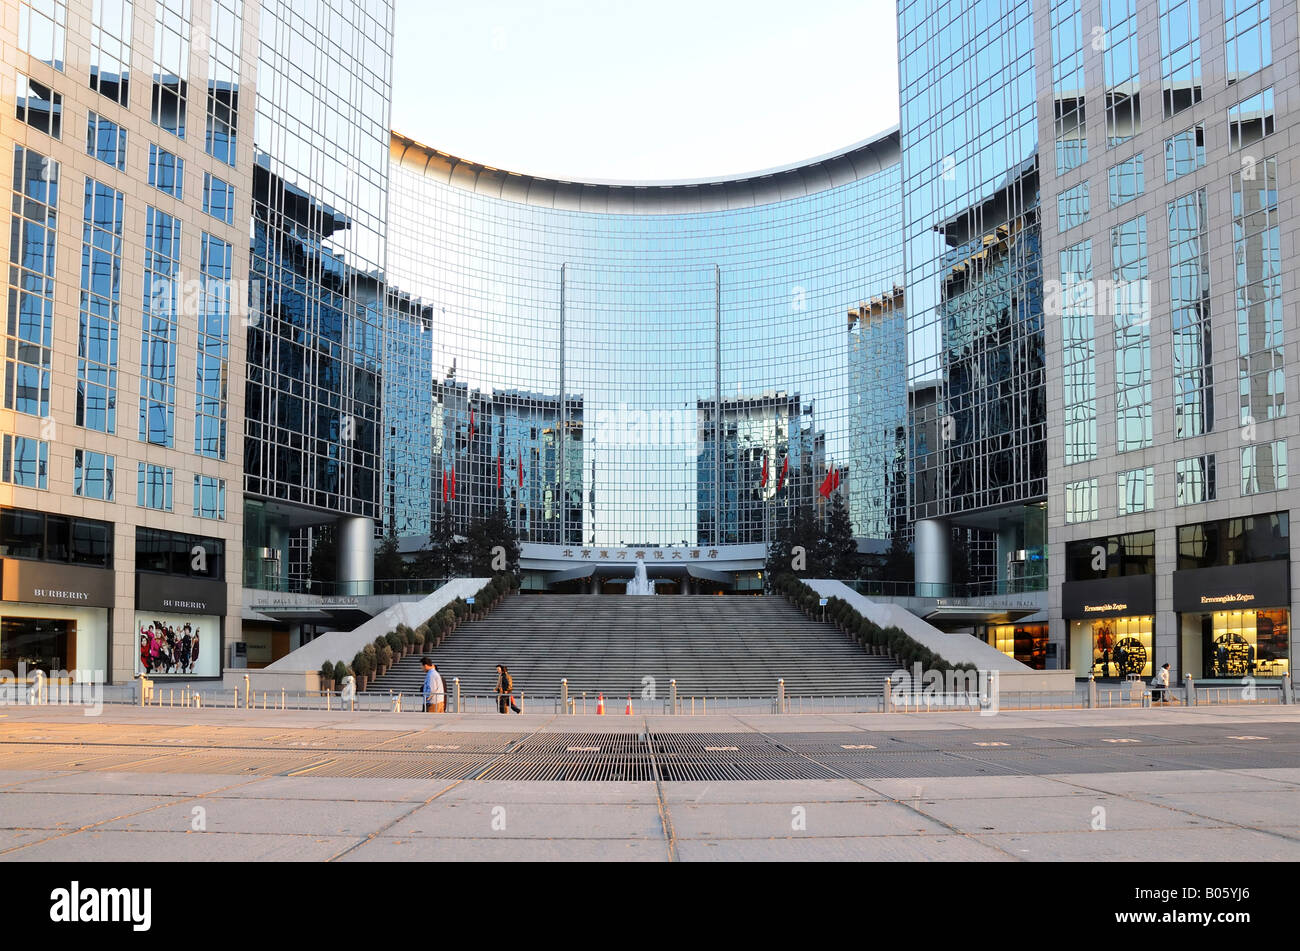 The Grand Hyatt Hotel and The Malls at Oriental Plaza, Dongchangan Jie, central Beijing, China. 2008 Stock Photo